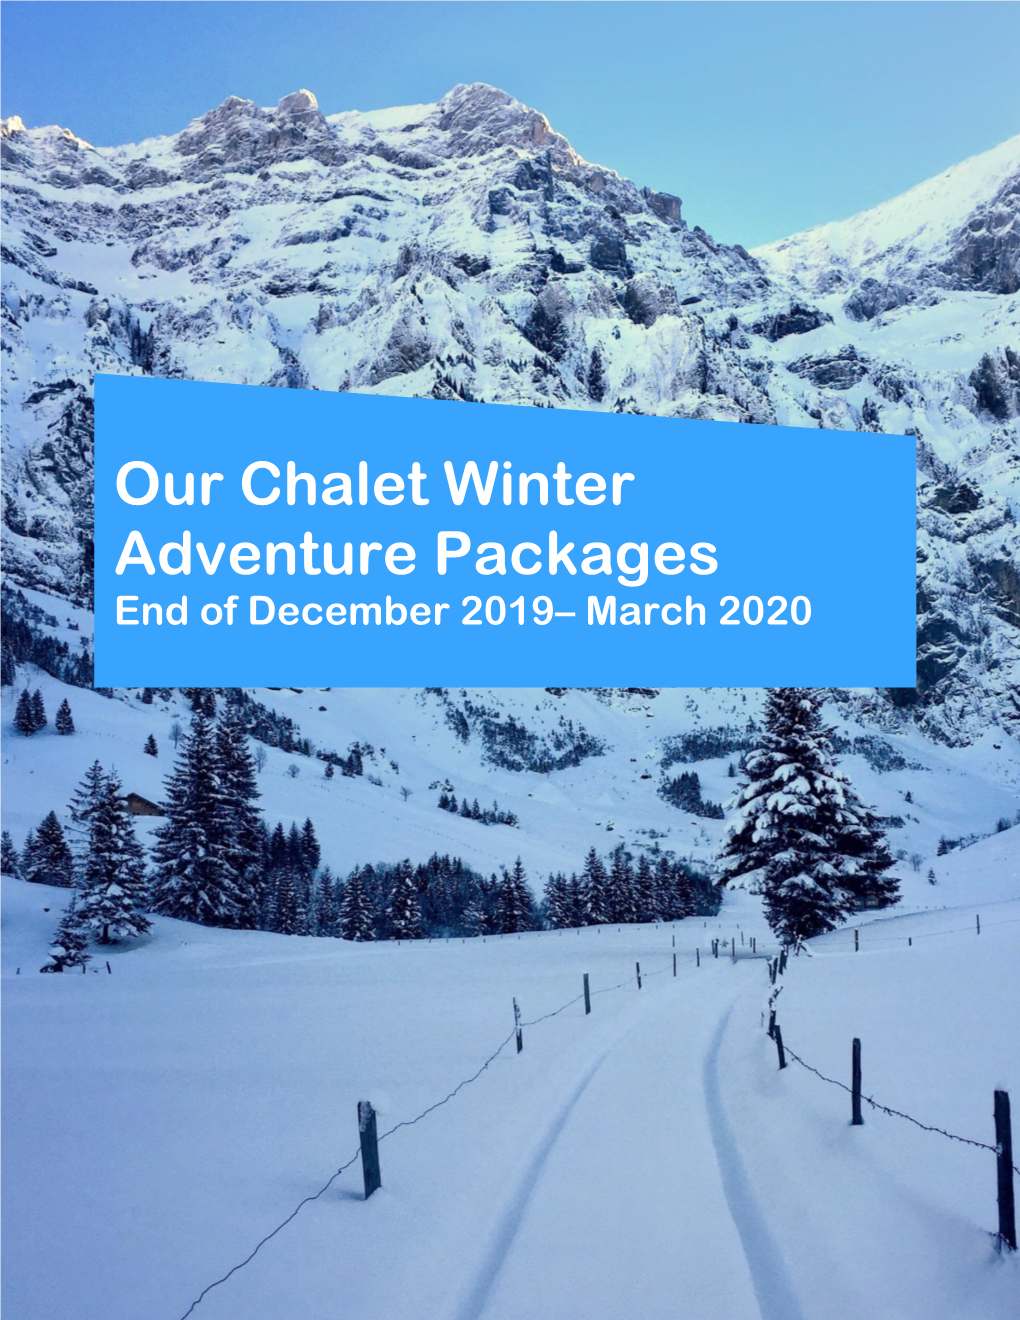 Our Chalet Winter Adventure Packages End of December 2019– March 2020